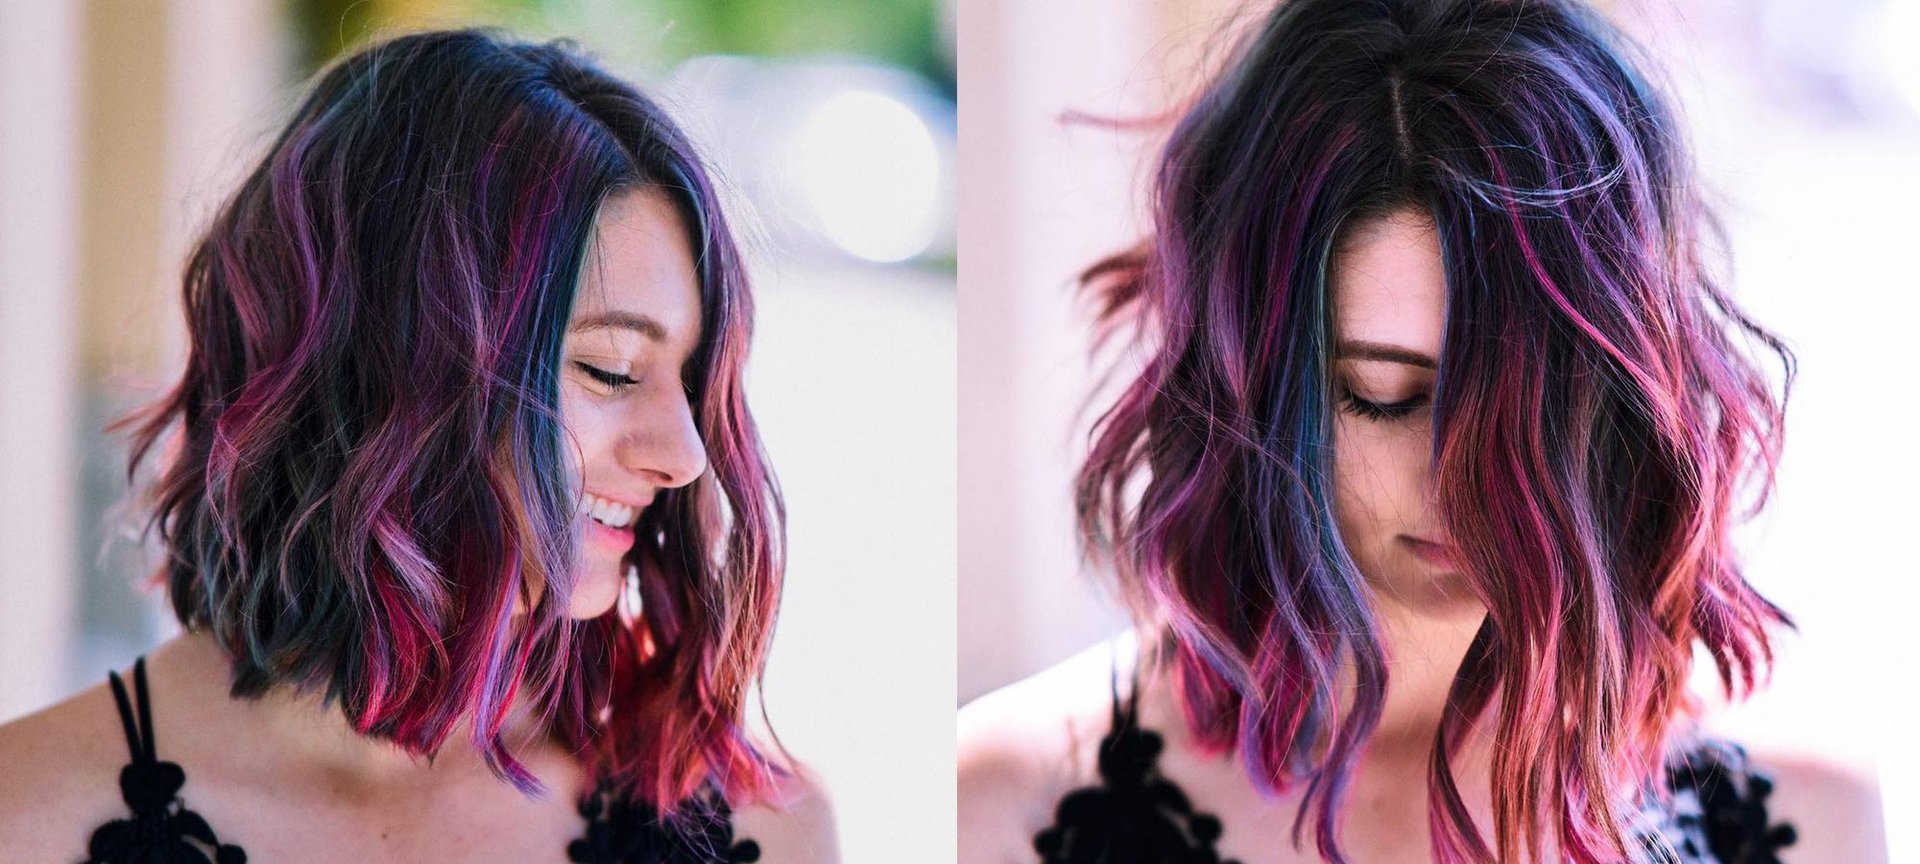 How To Get Oil Slick Hair